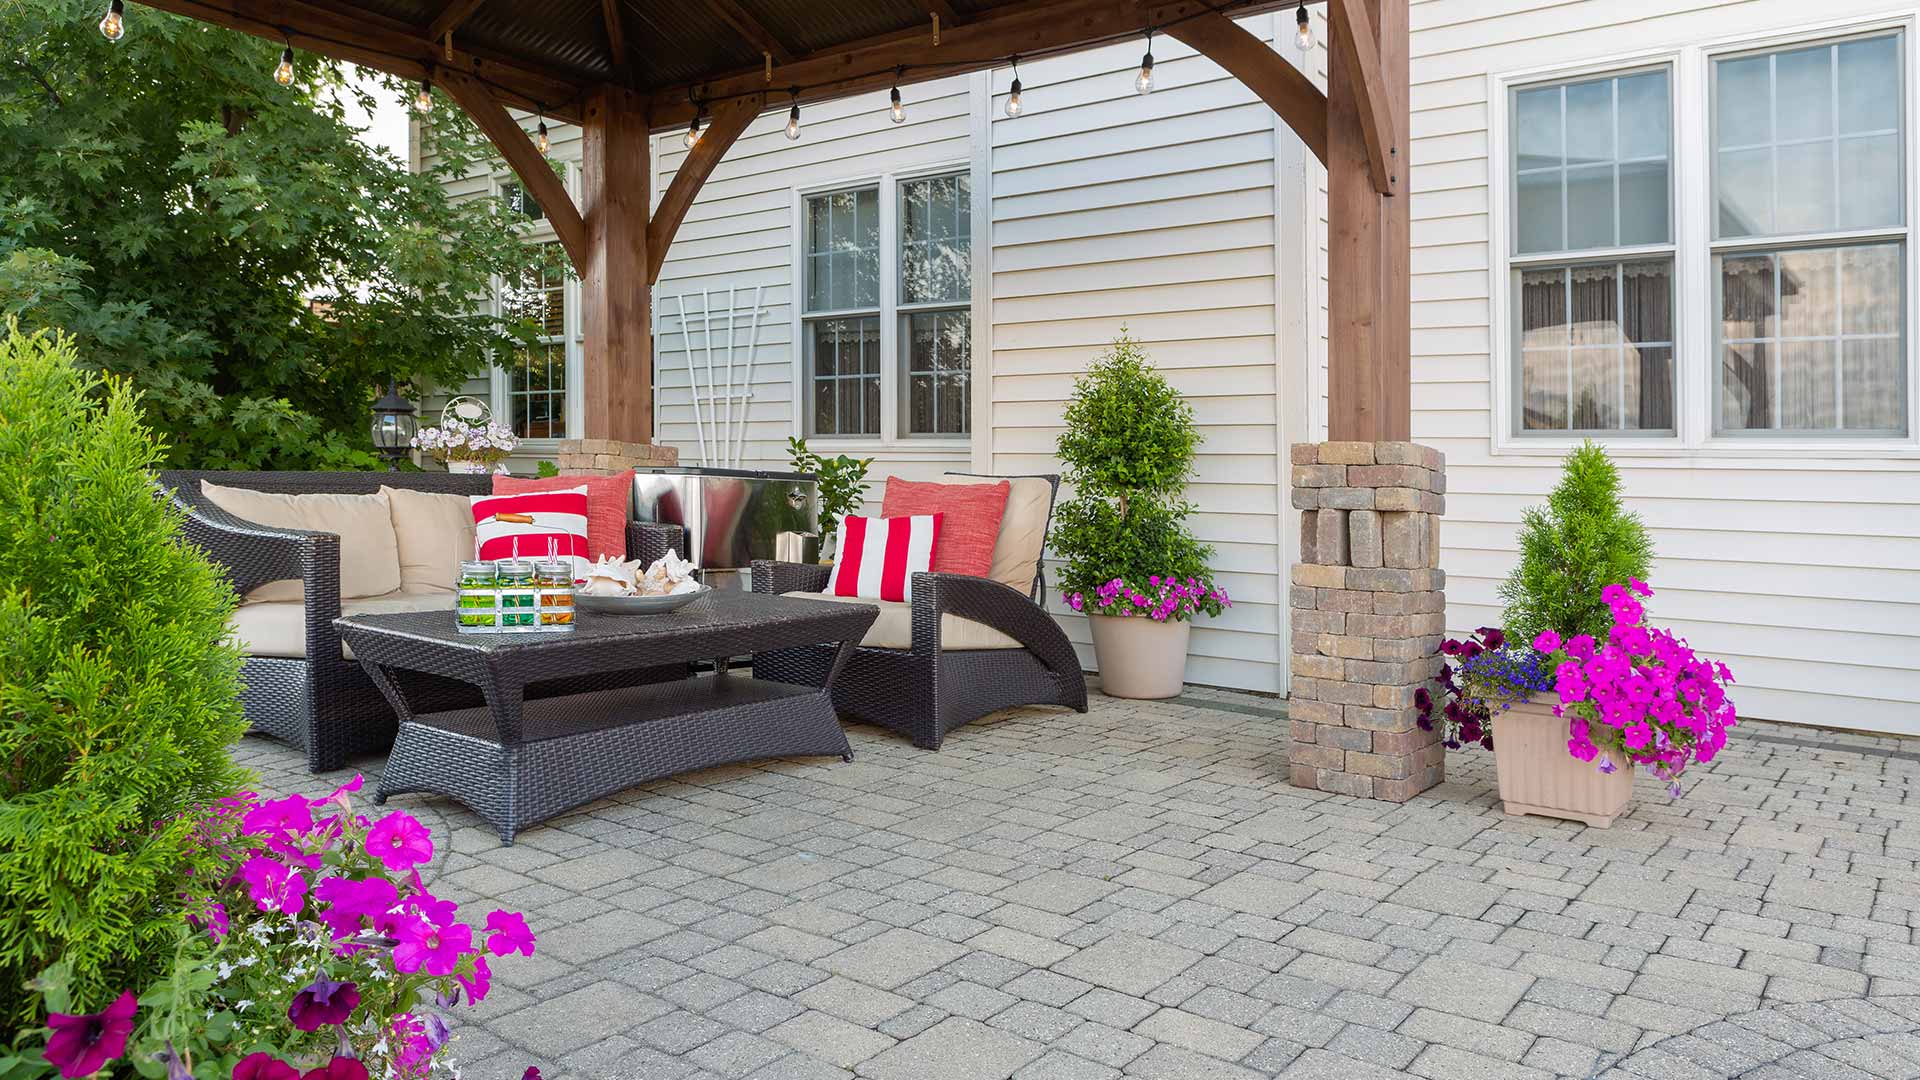 Looking To Install a Patio on Your Property? Here Are 3 Things to Consider